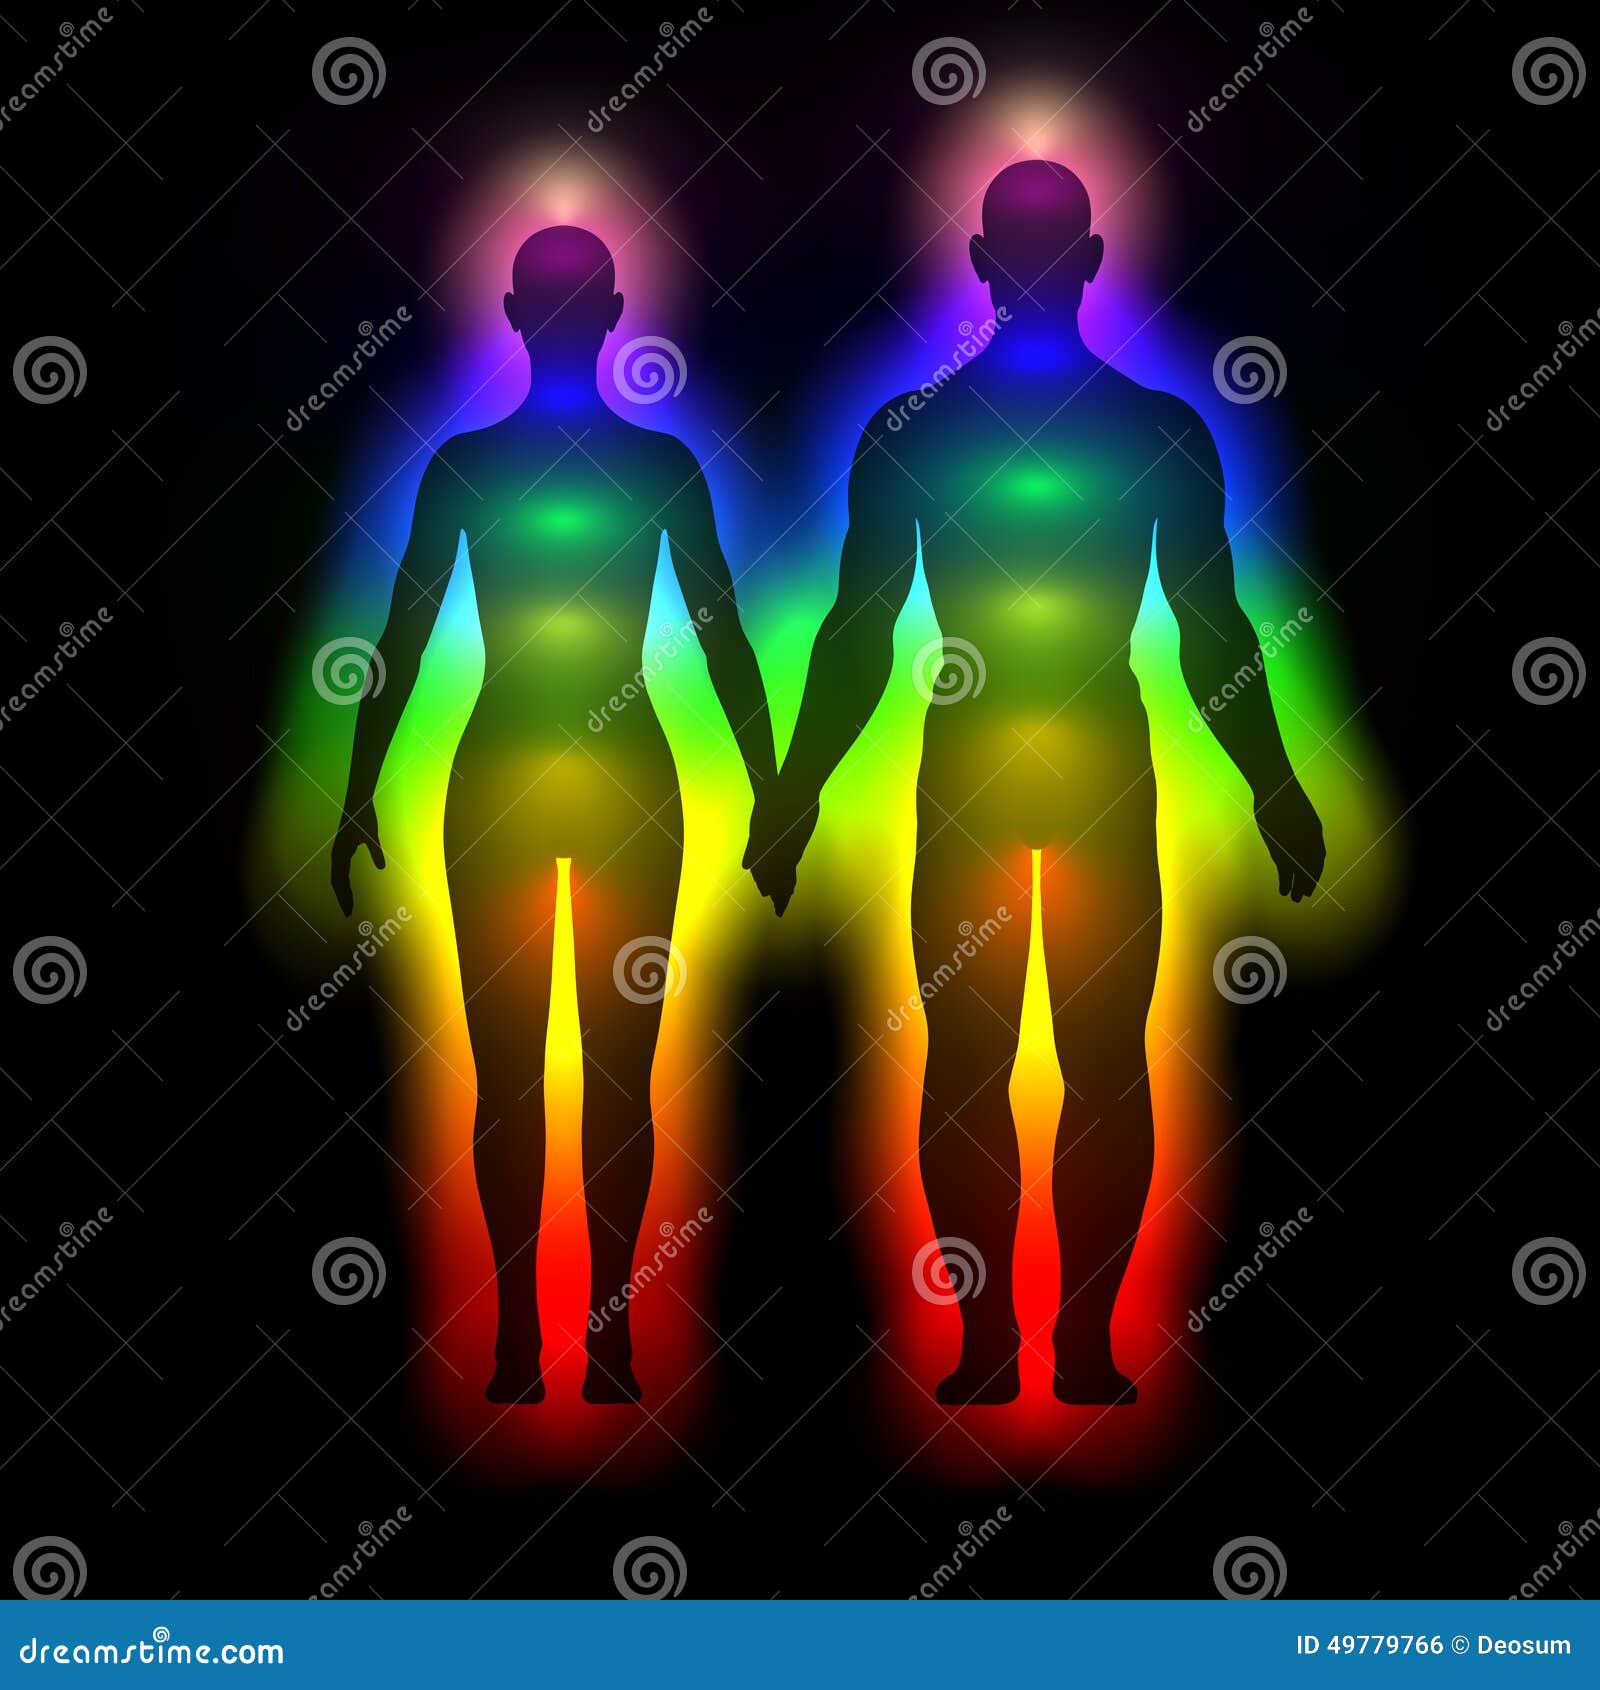 rainbow silhouette of human body with aura - woman and man